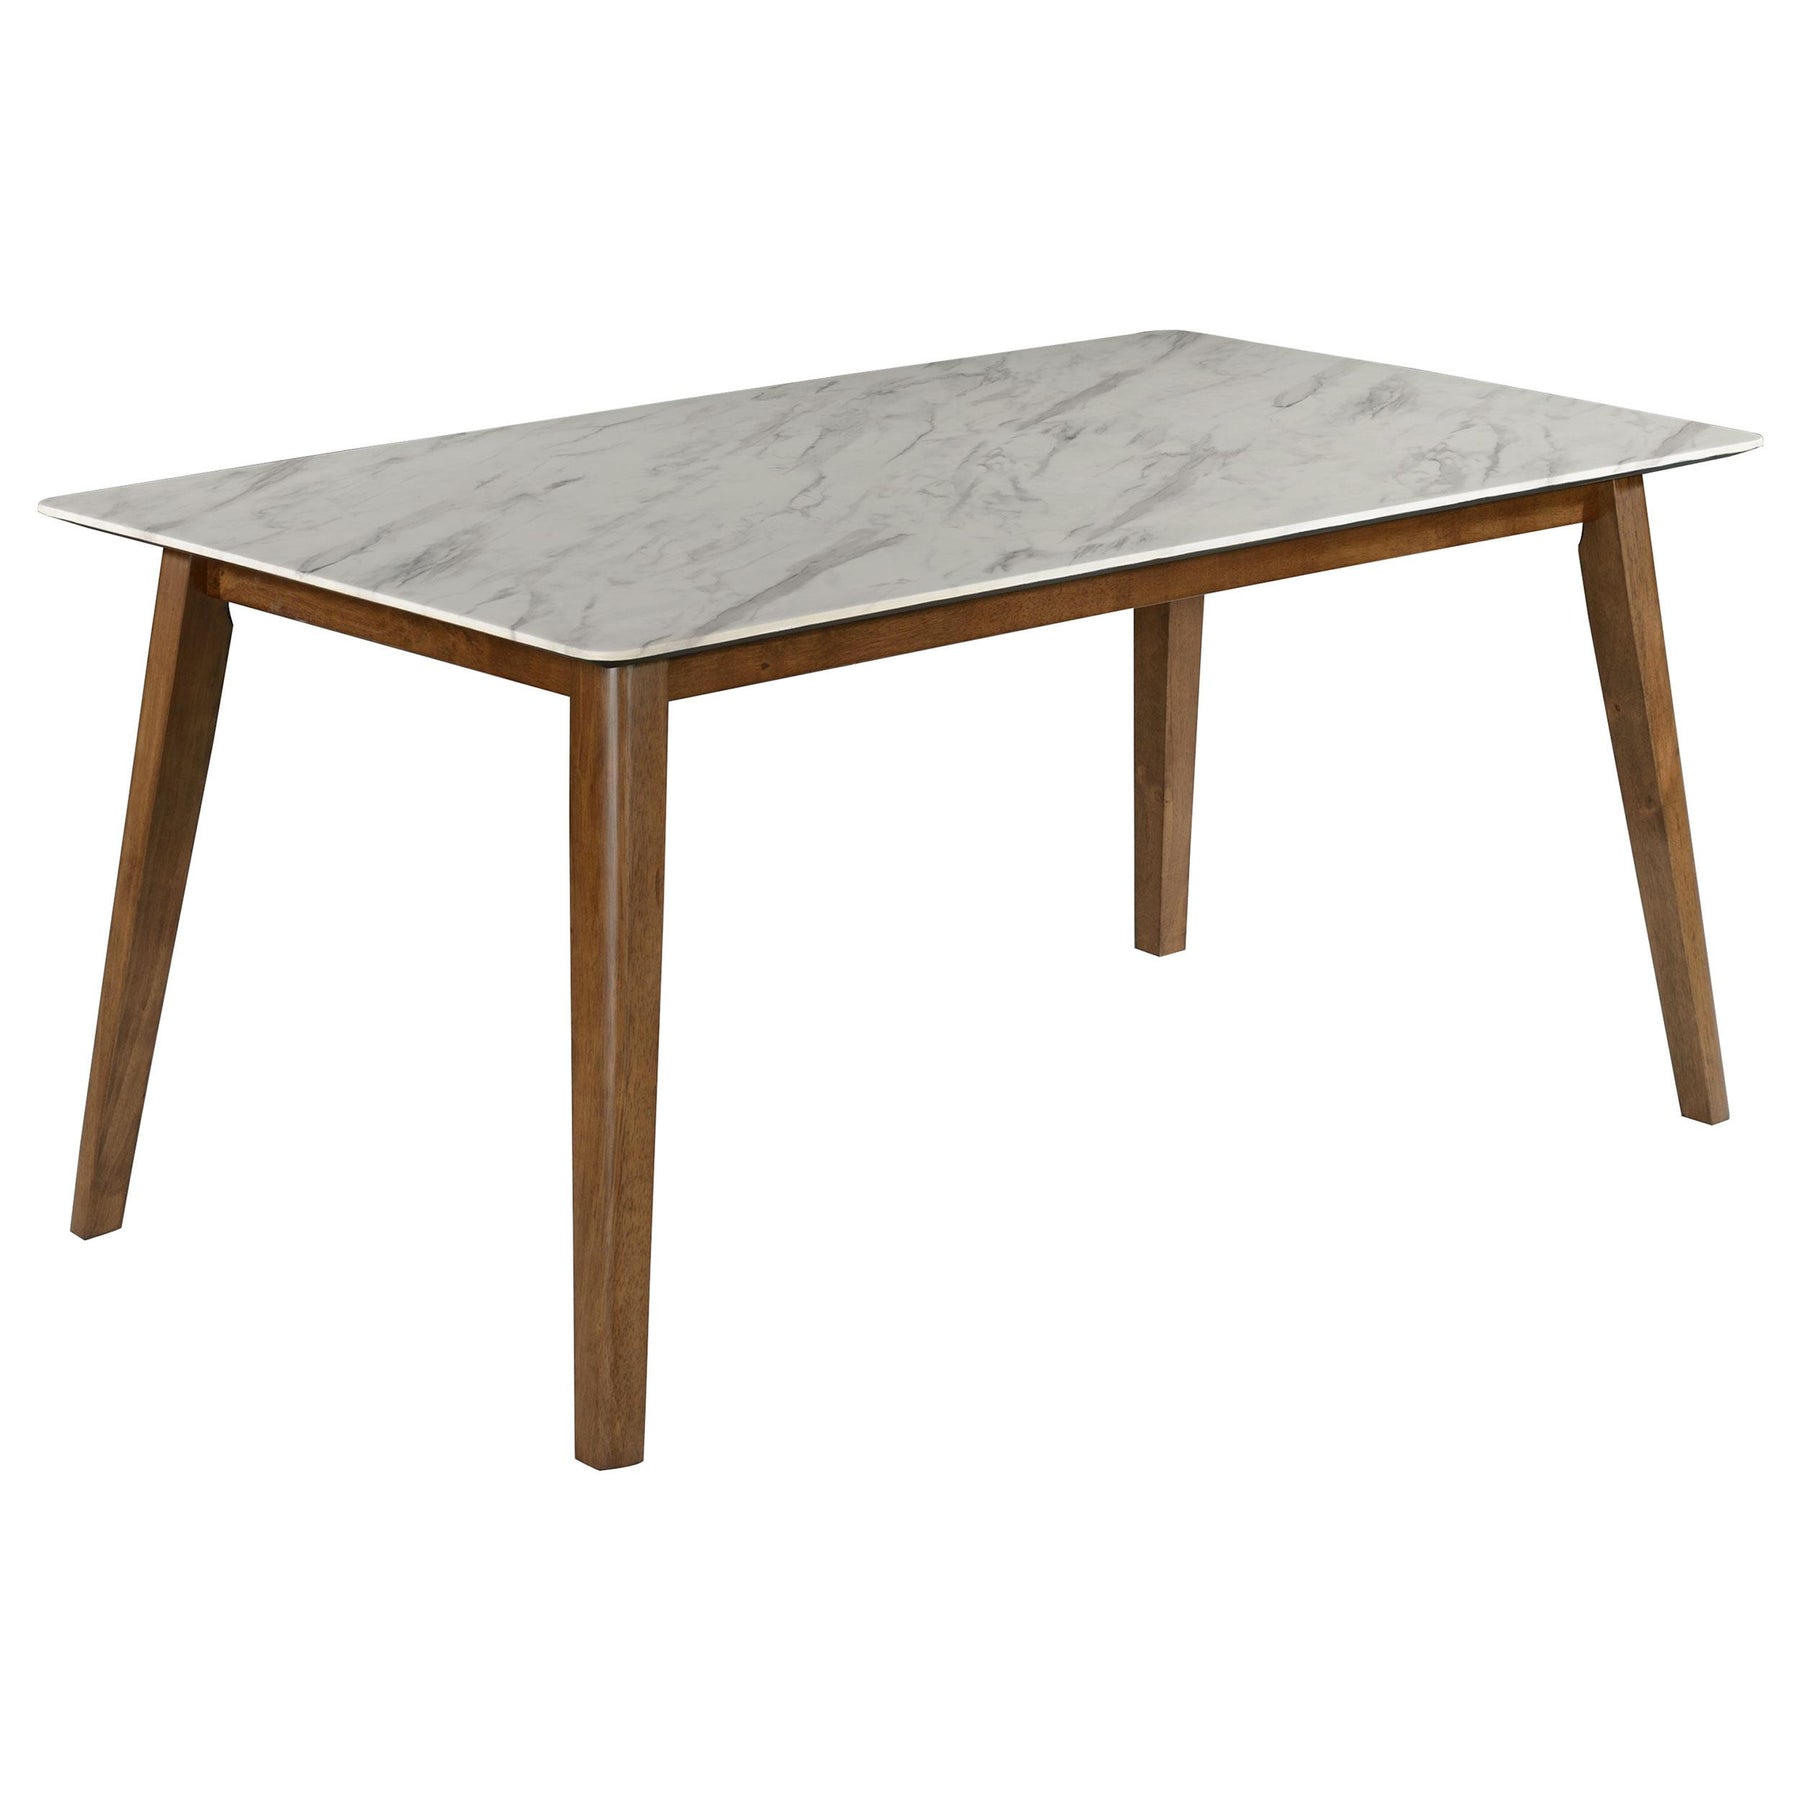 Everett Faux Marble Top Dining Table Natural Walnut and White Everett Faux Marble Top Dining Table Natural Walnut and White Half Price Furniture